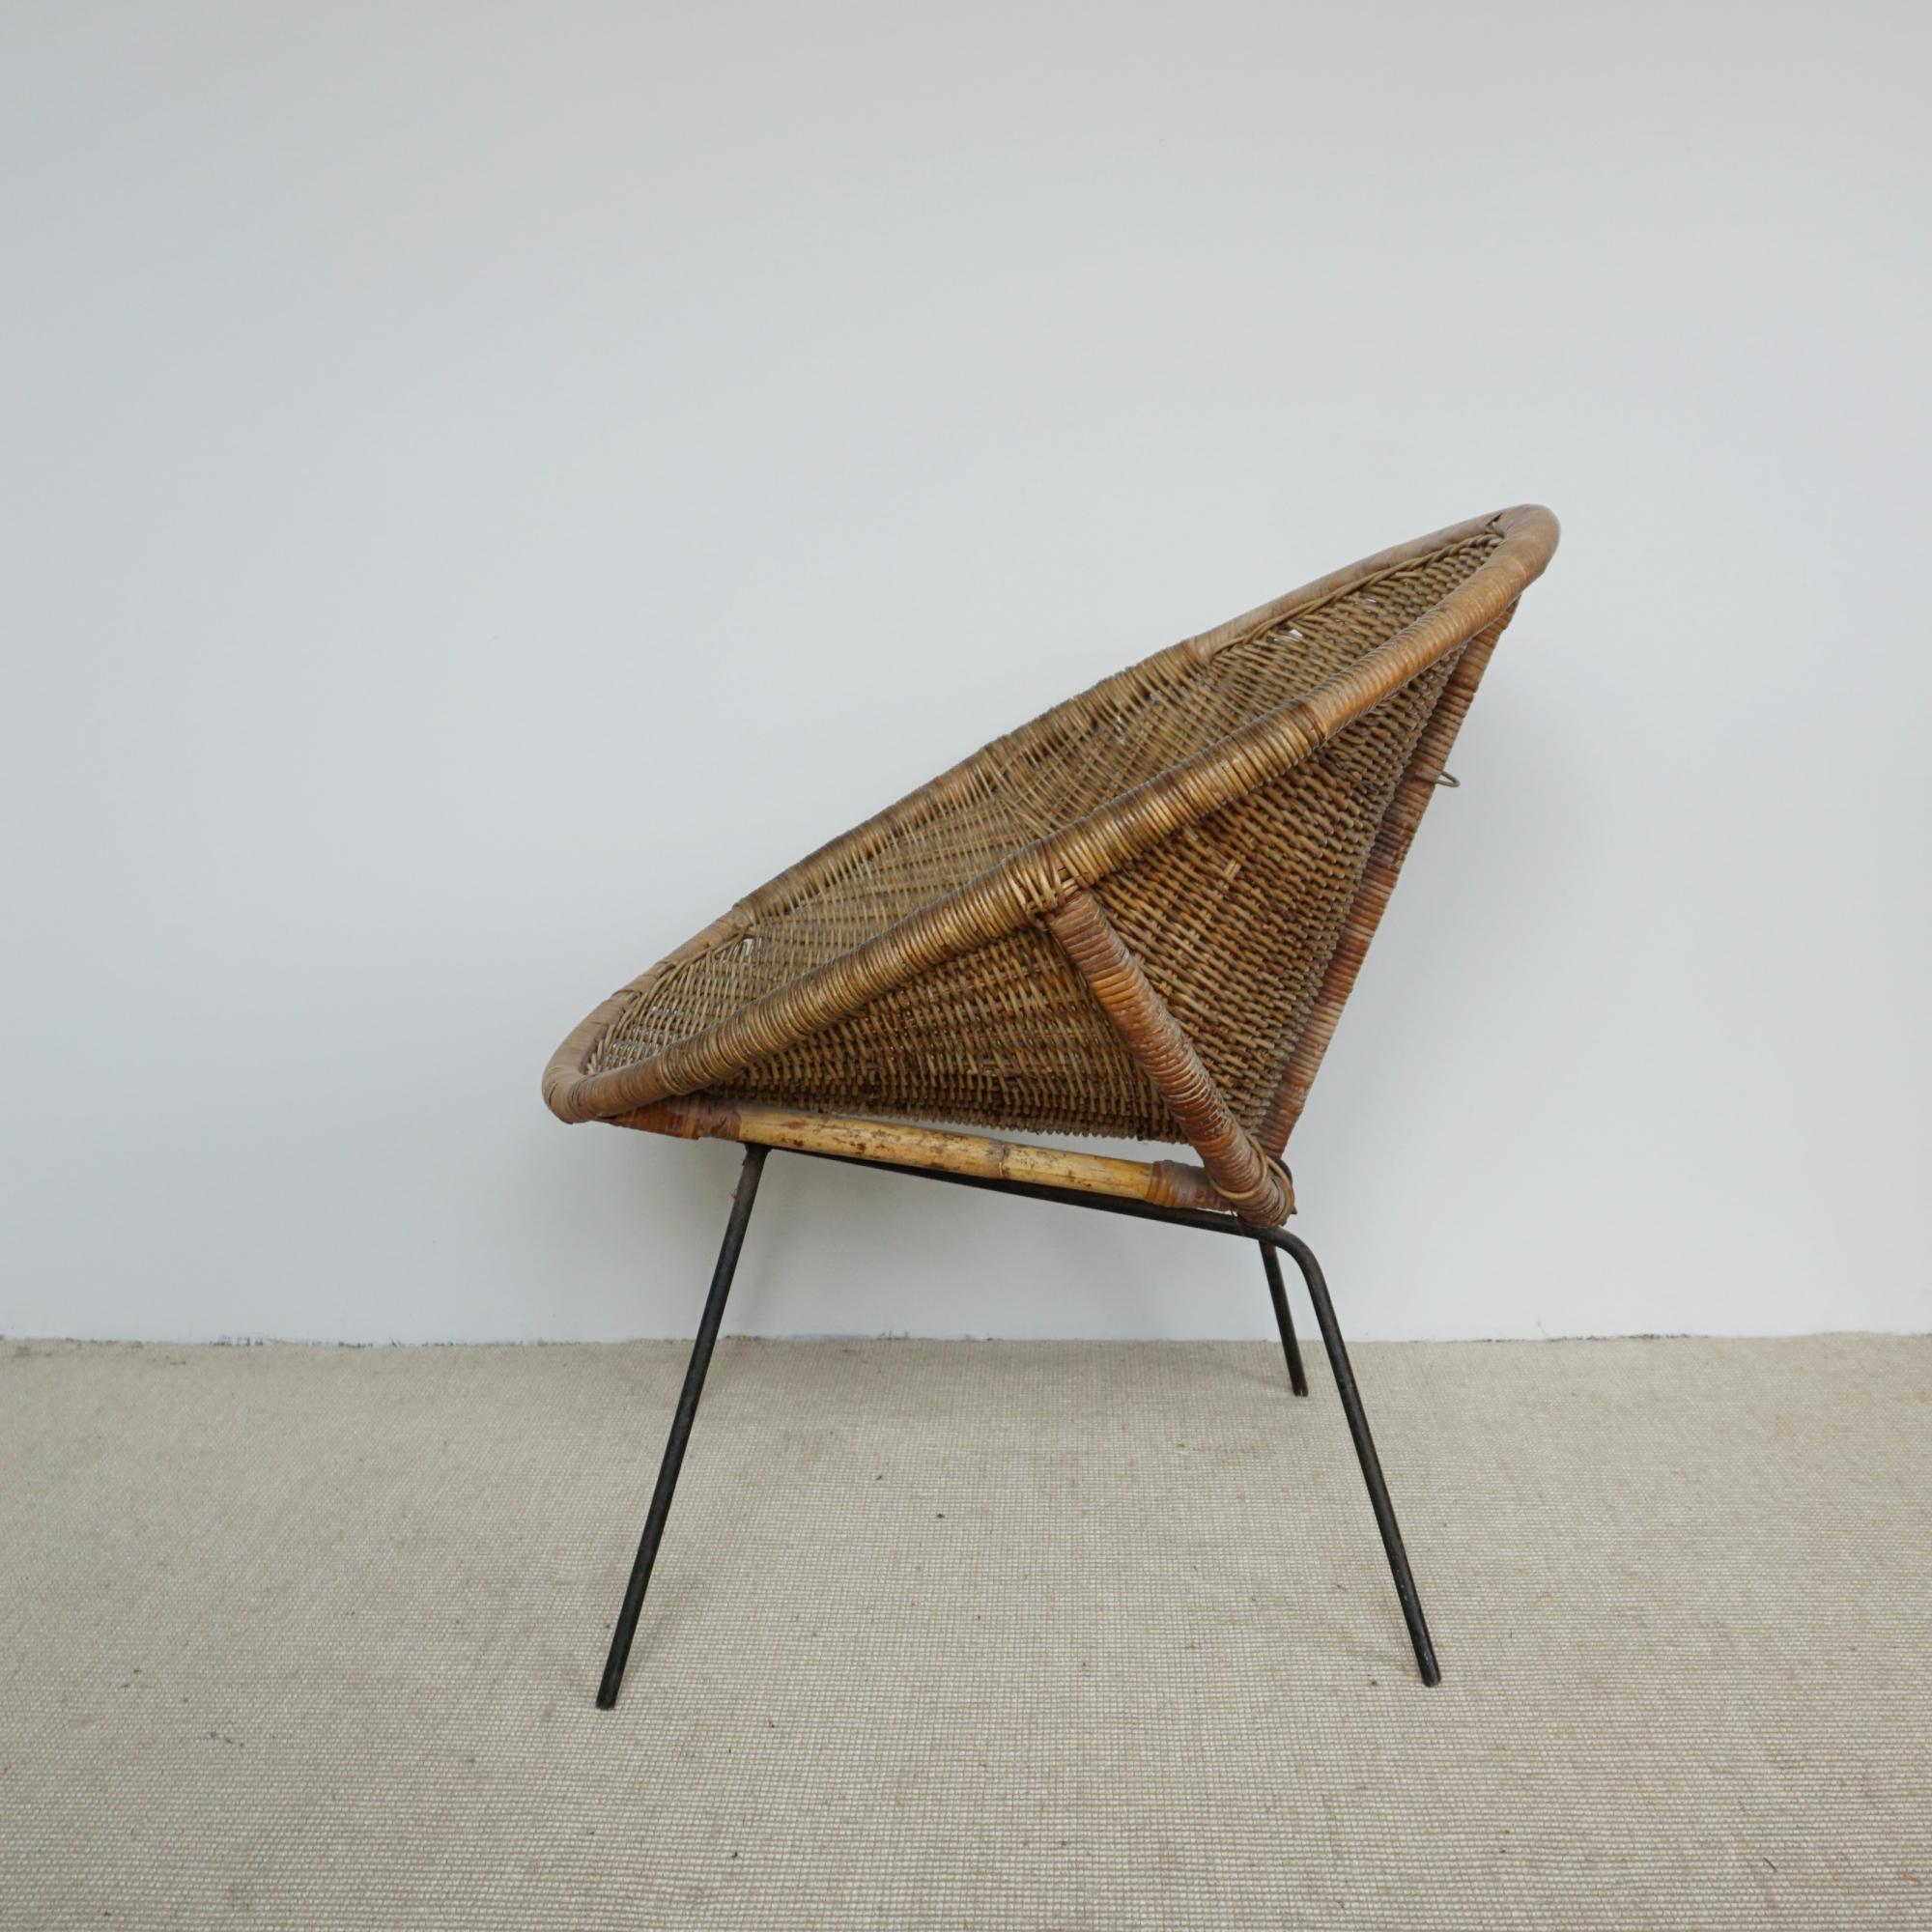 Picasso's Wicker and Steel Chair from the Madoura Collection Circa 1960 In Good Condition For Sale In Forest Row, East Sussex